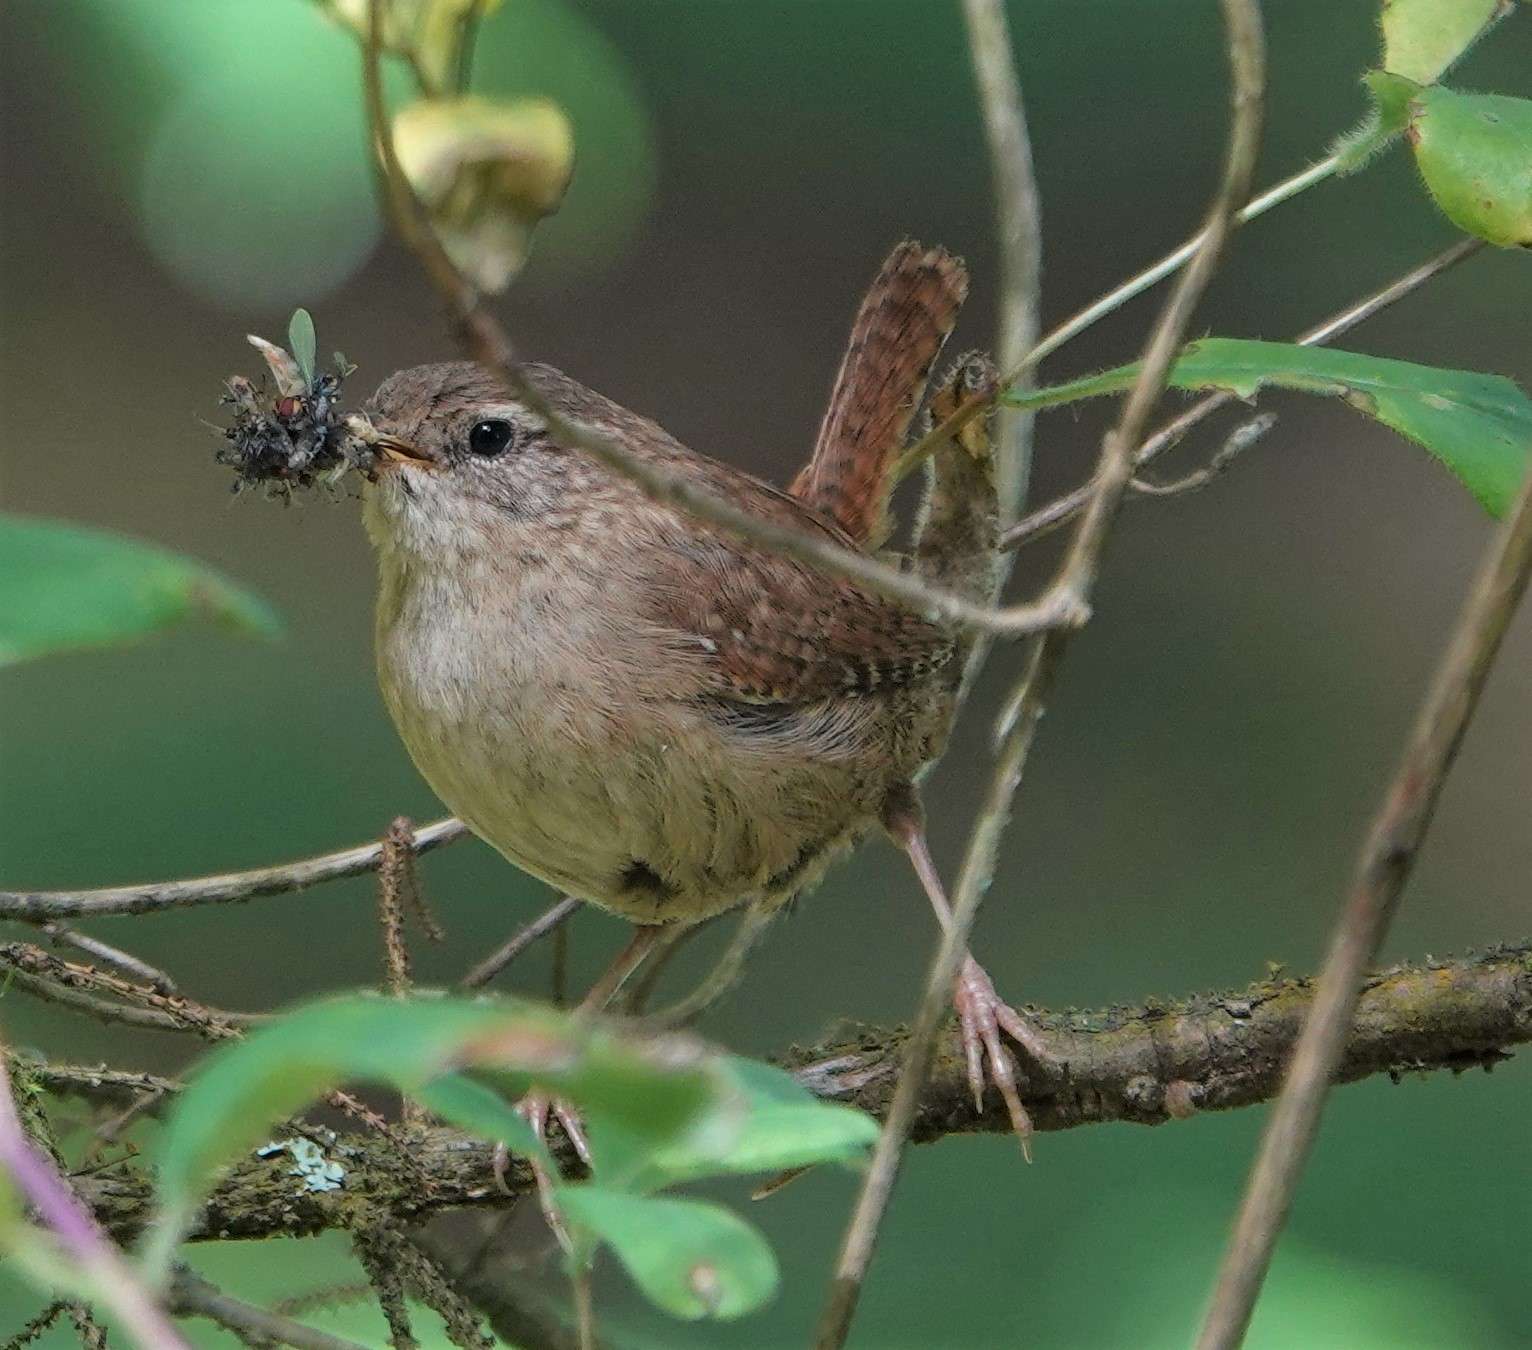 Wren by Paul Howrihane at Cookworthy Forest